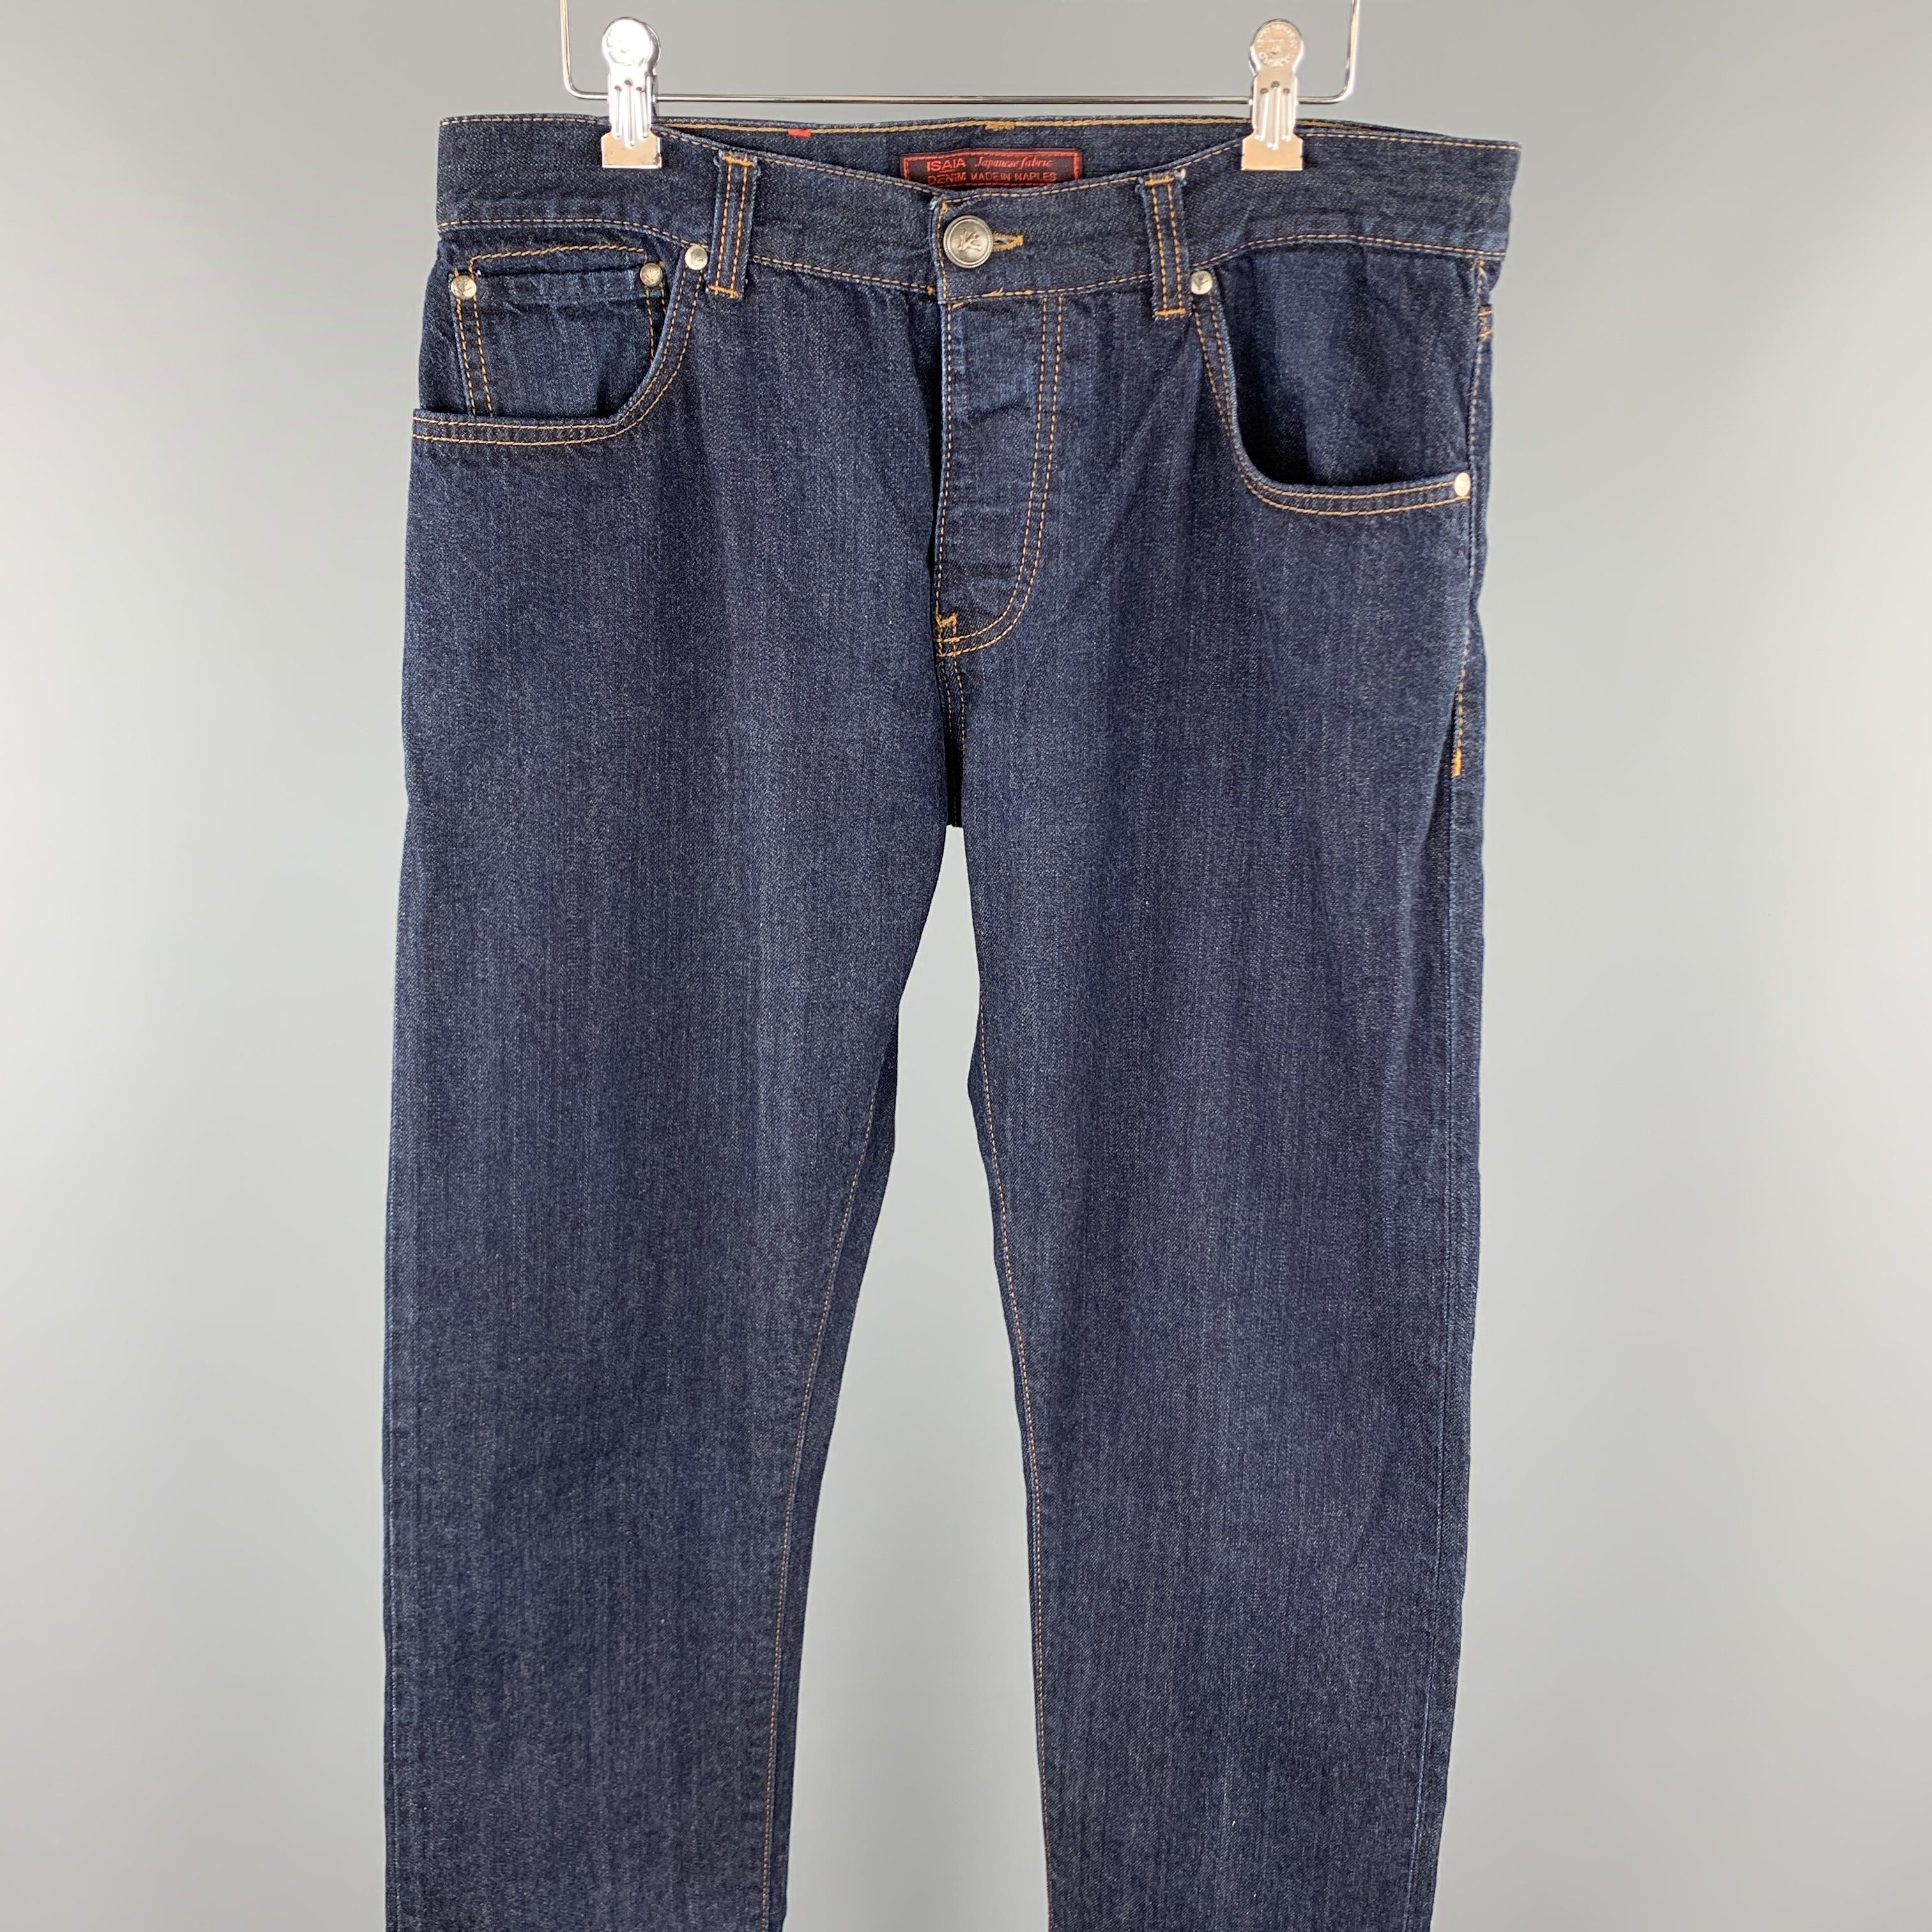 ISAIA jeans comes in a indigo selvedge denim featuring contrast stitching and a button fly closure. Made in Italy.

Excellent Pre-Owned Condition.
Marked: 34

Measurements:

Waist: 34 in. 
Rise: 9 in. 
Inseam: 34 in. 